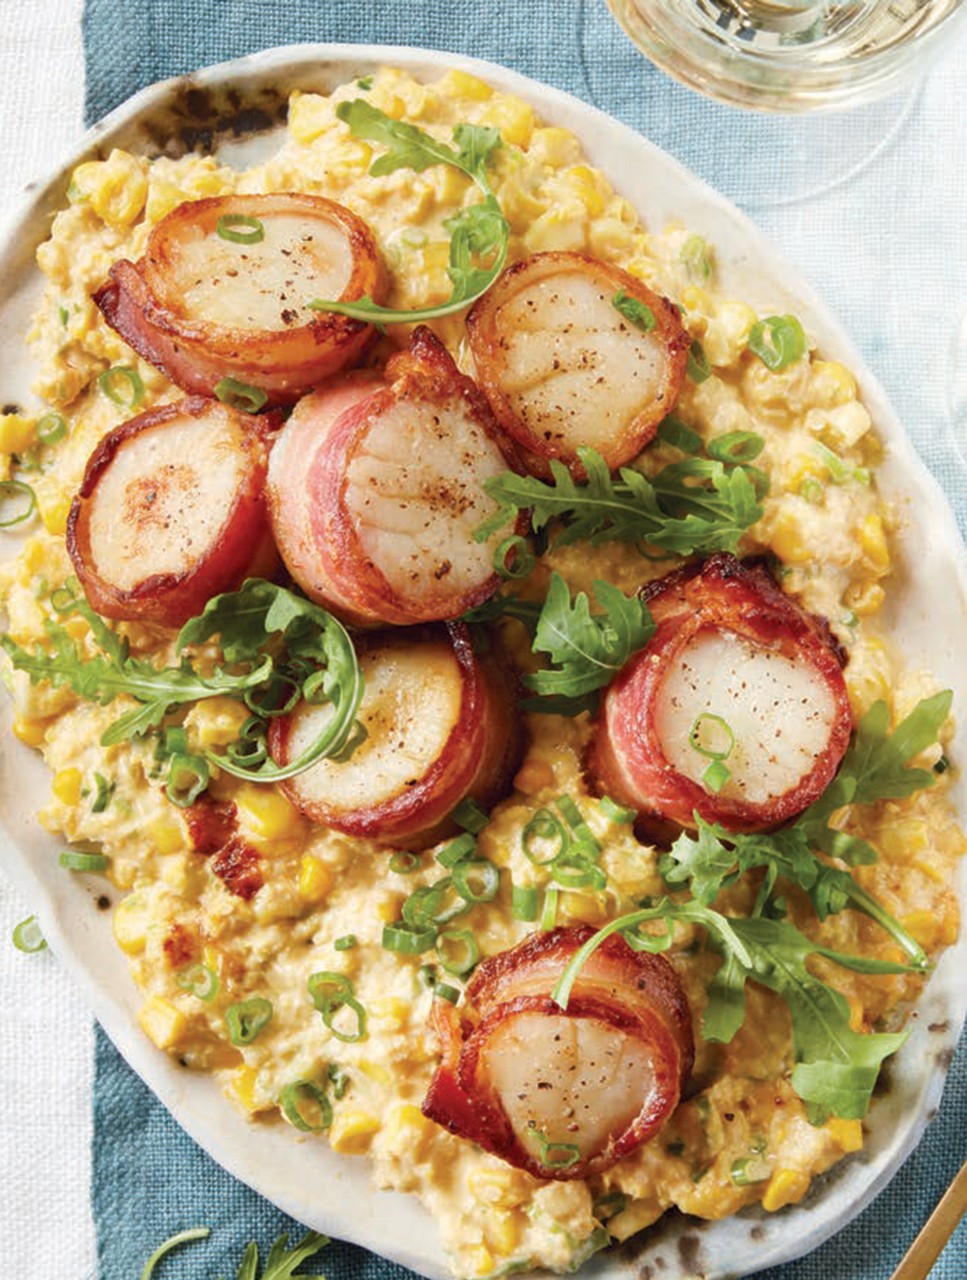 Southern Creamed Corn with Bacon-Wrapped Scallops